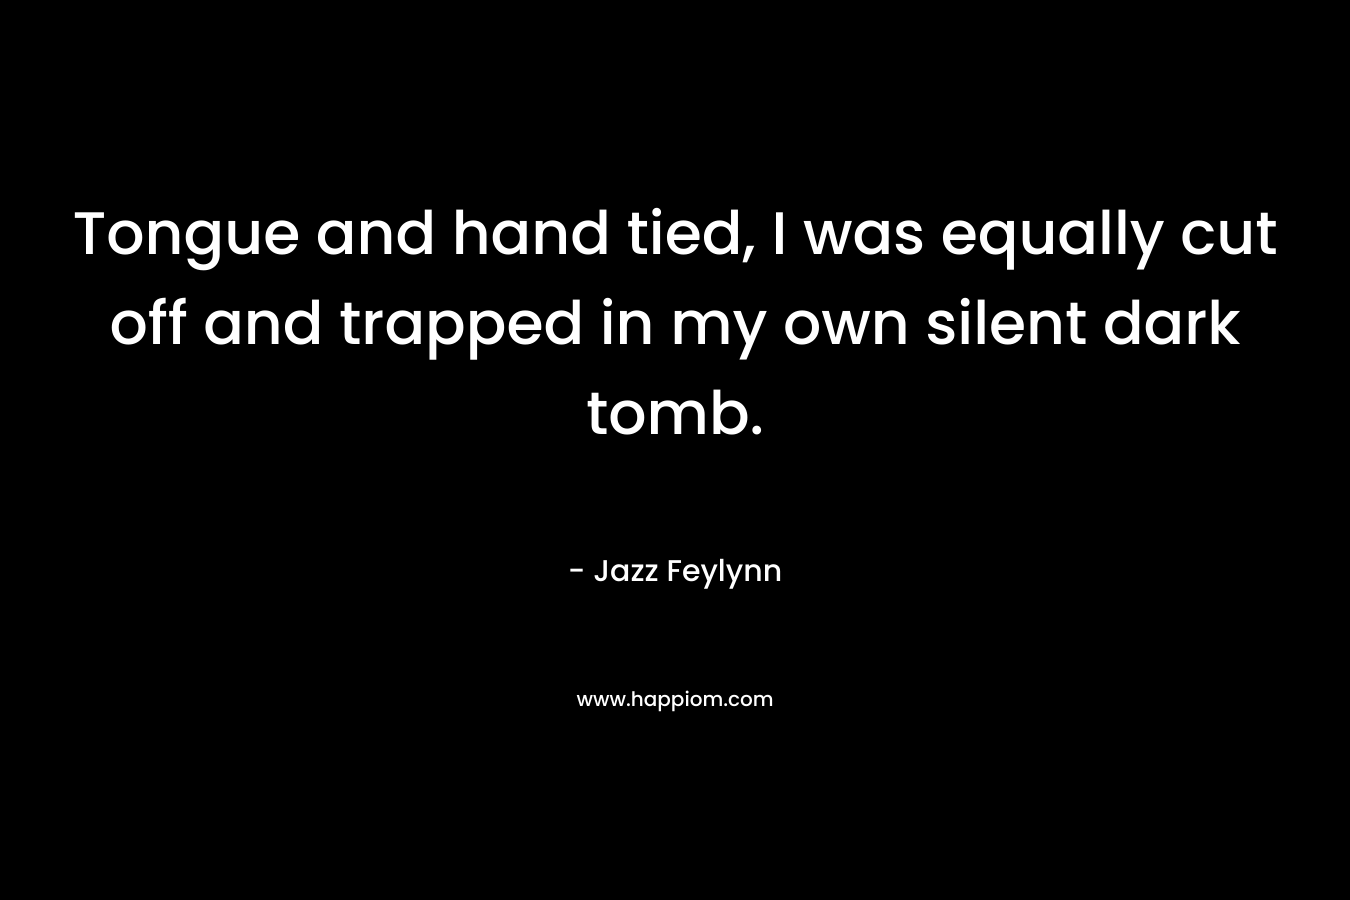 Tongue and hand tied, I was equally cut off and trapped in my own silent dark tomb. – Jazz Feylynn